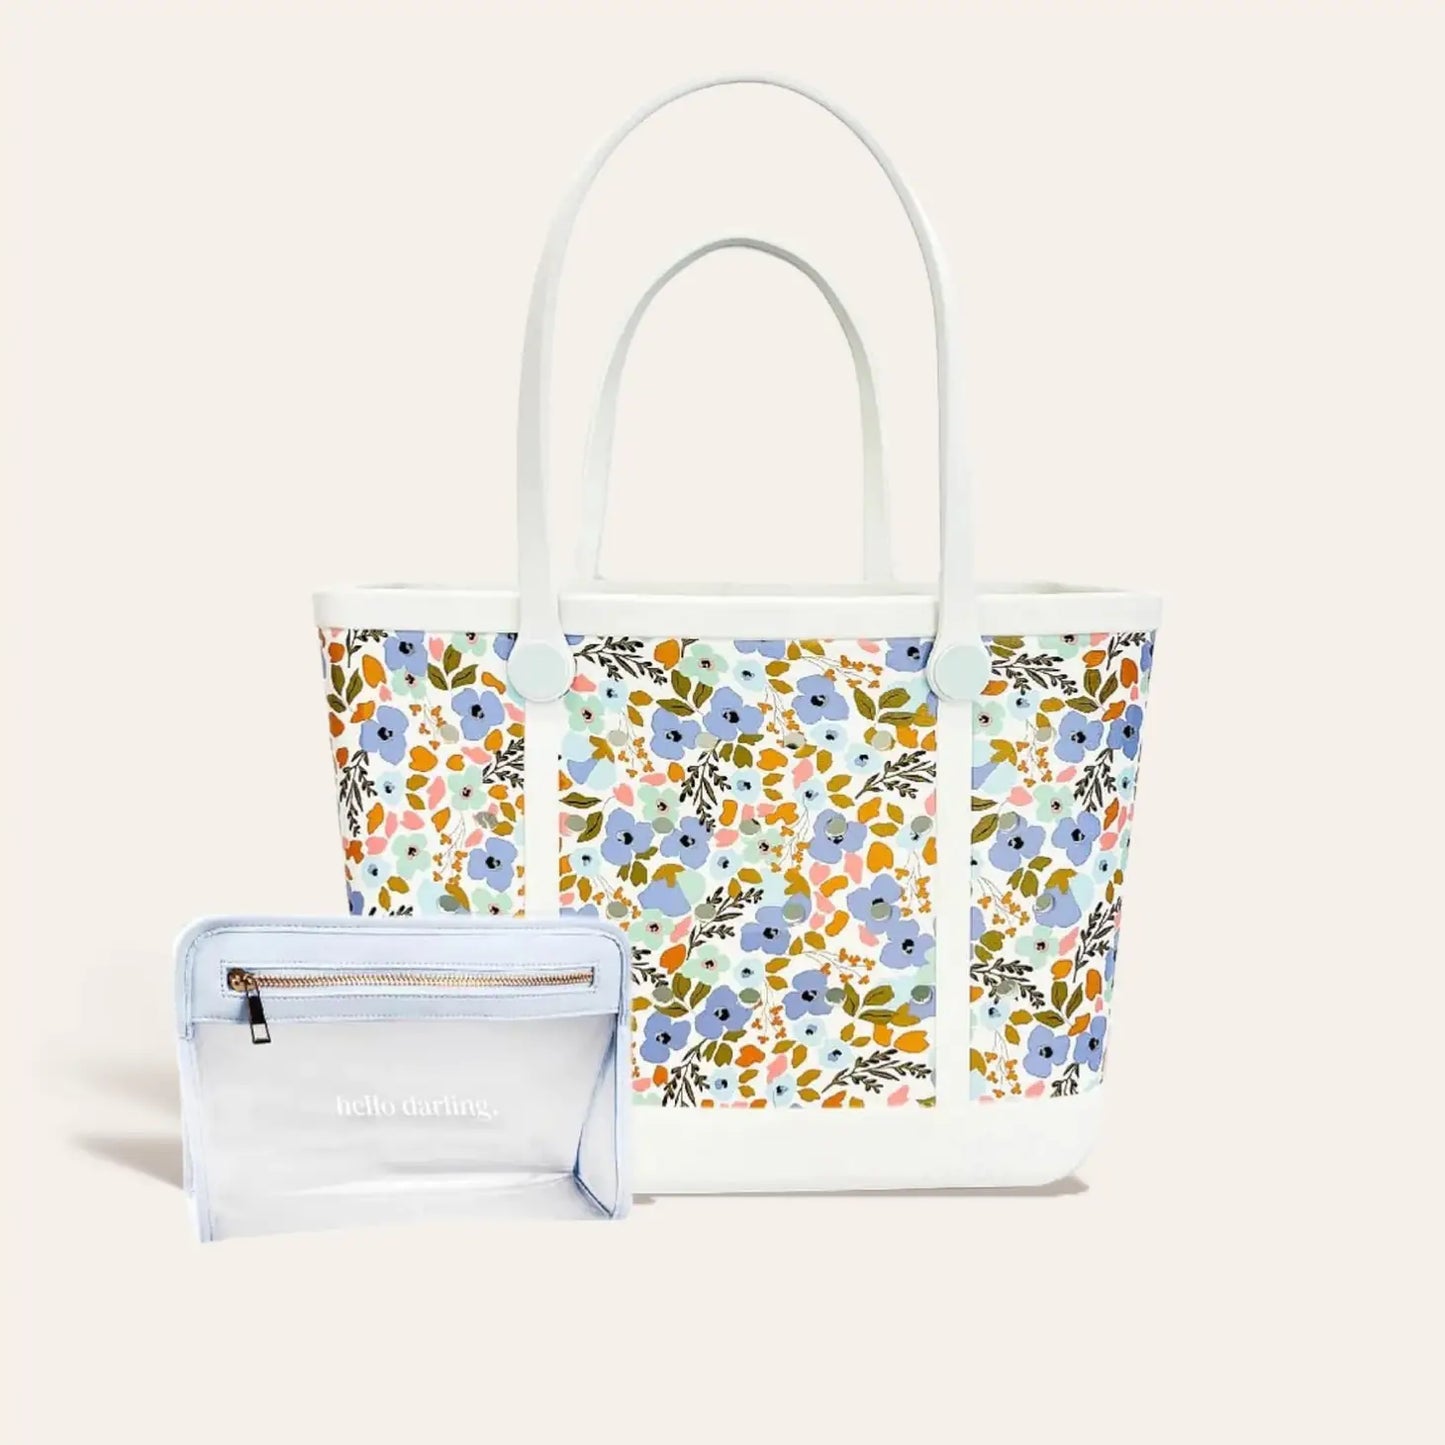 Carry-It-All Tote Bag- All Day Dainty